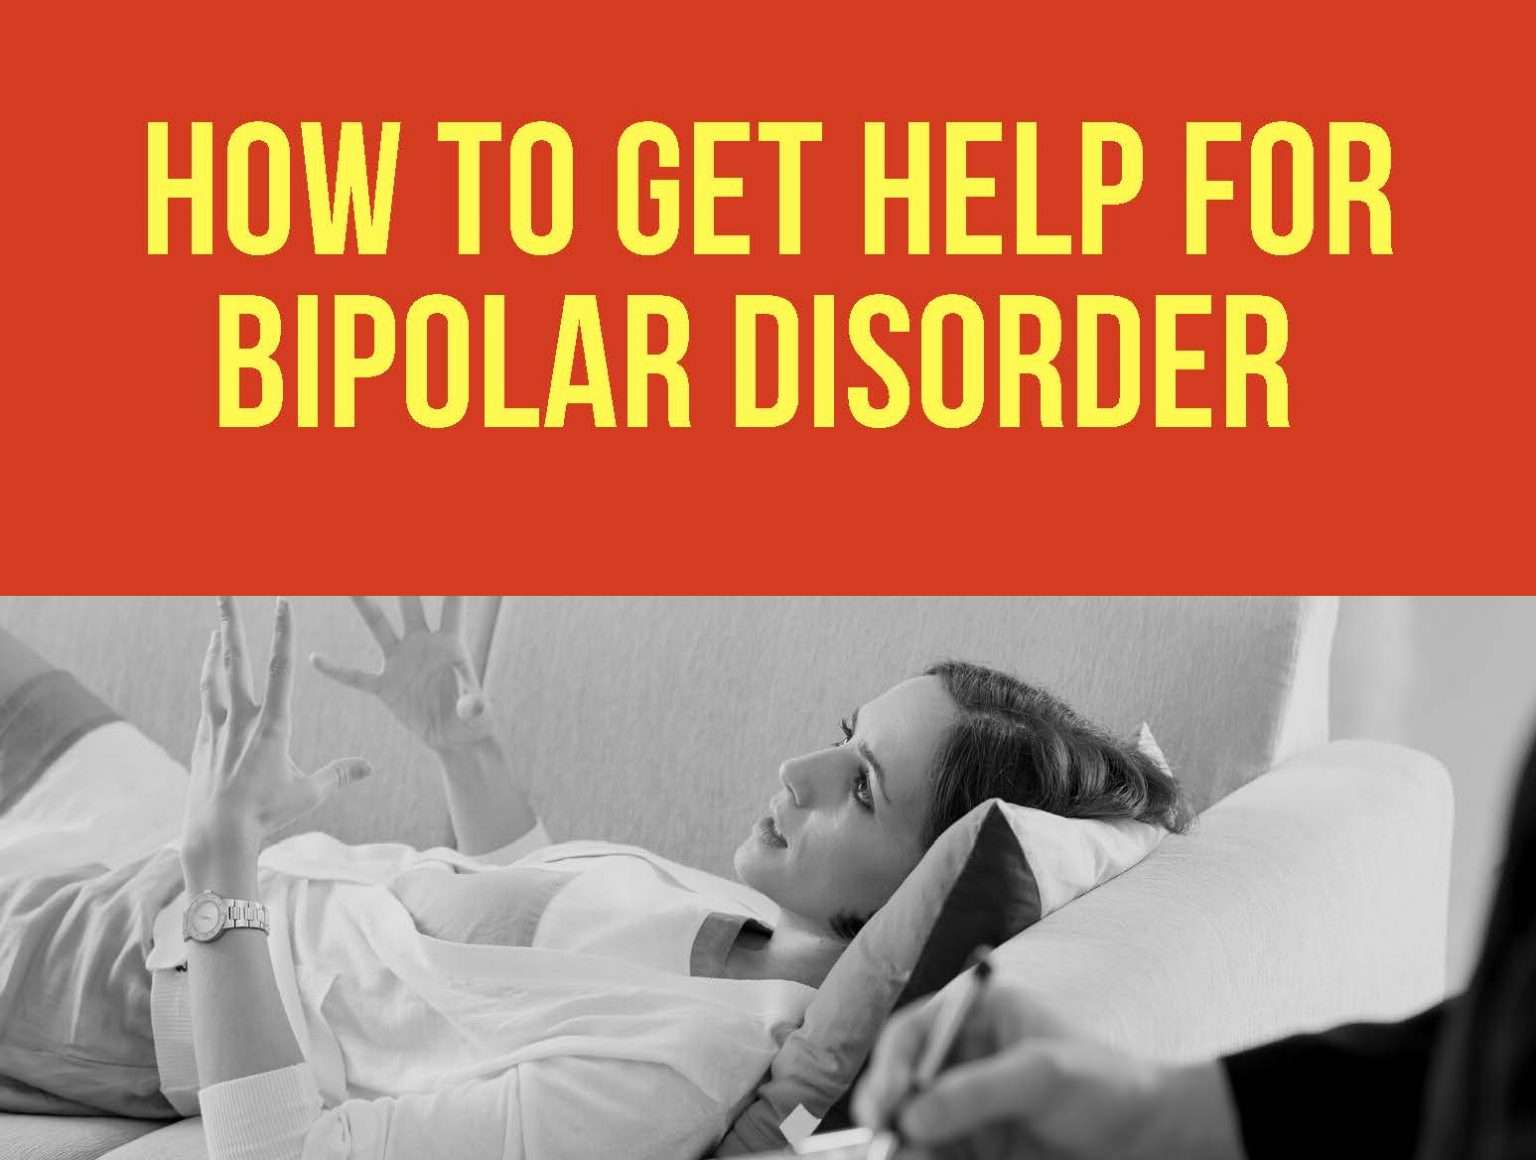 How to Get Help for Bipolar Disorder